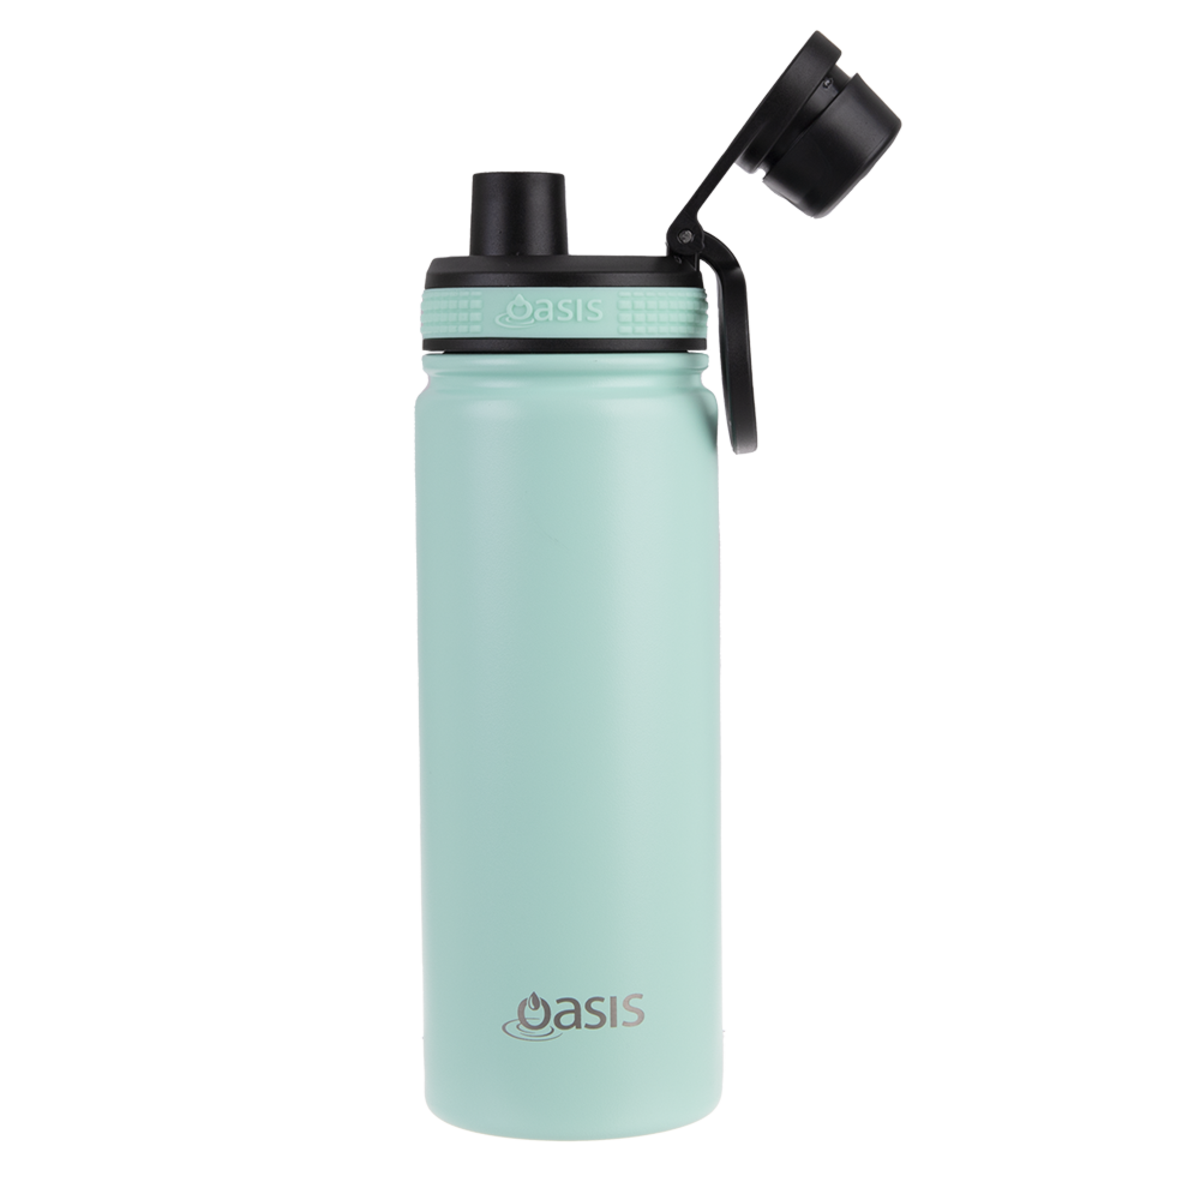 OASIS STAINLESS STEEL DOUBLE WALL INSULATED "CHALLENGER" SPORTS BOTTLE W/ SCREW CAP 550ML - Mint